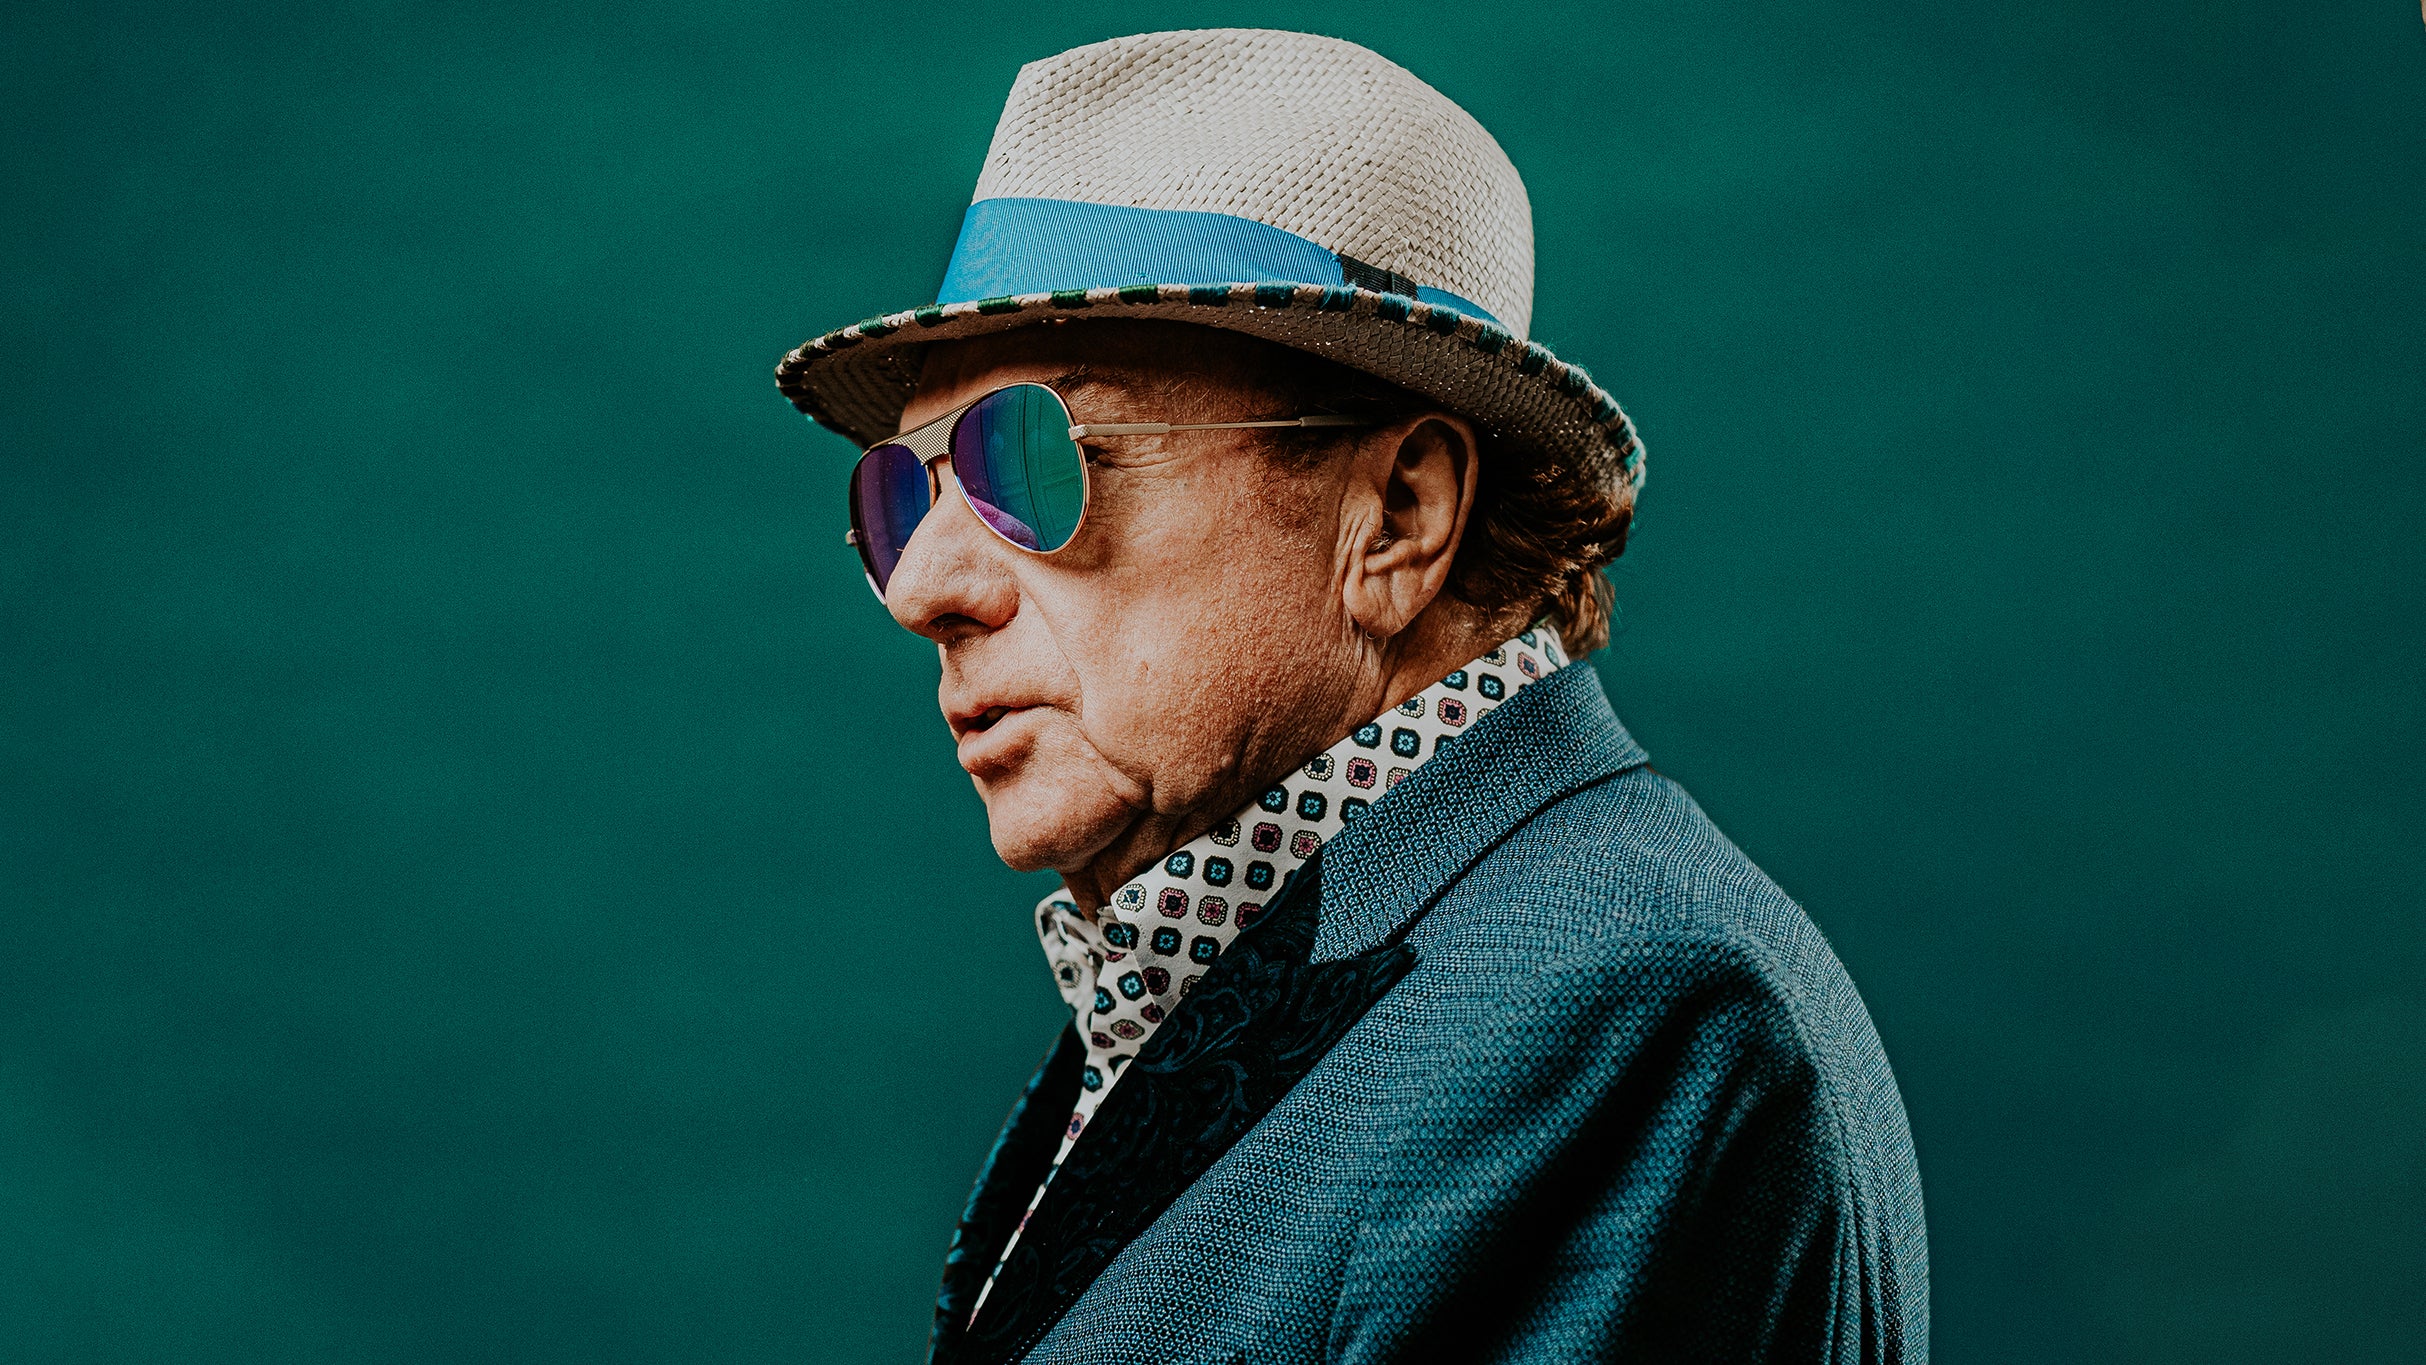 Van Morrison in London promo photo for Past Bookers presale offer code